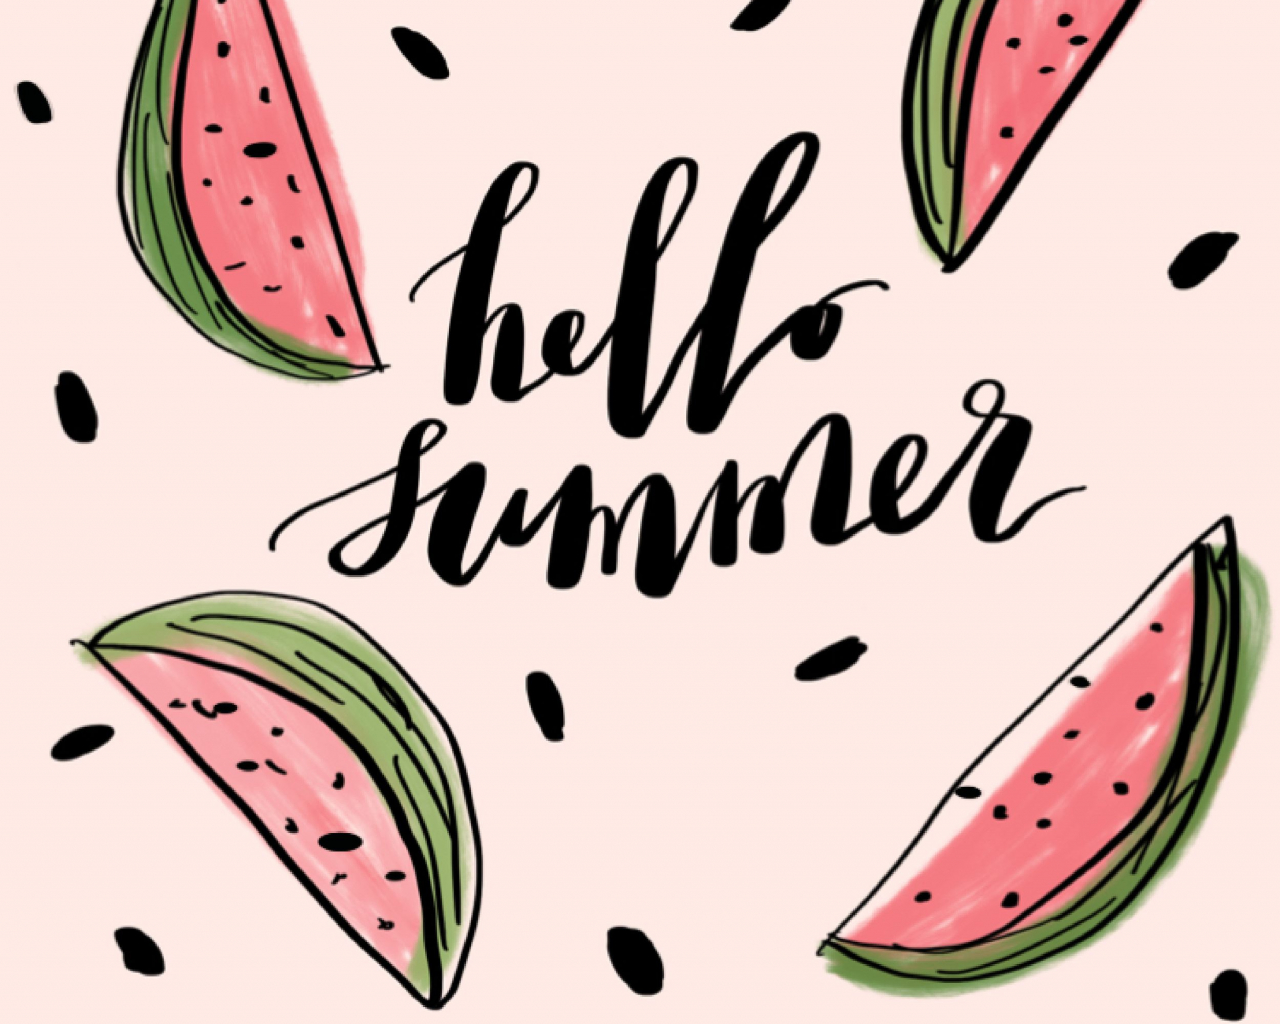 Free download Hello Summer FREE Wallpaper TCL Summer wallpaper Watermelon [2500x4446] for your Desktop, Mobile & Tablet. Explore Summer Free Wallpaper. Free Summer Wallpaper Background, Free Summer Wallpaper For